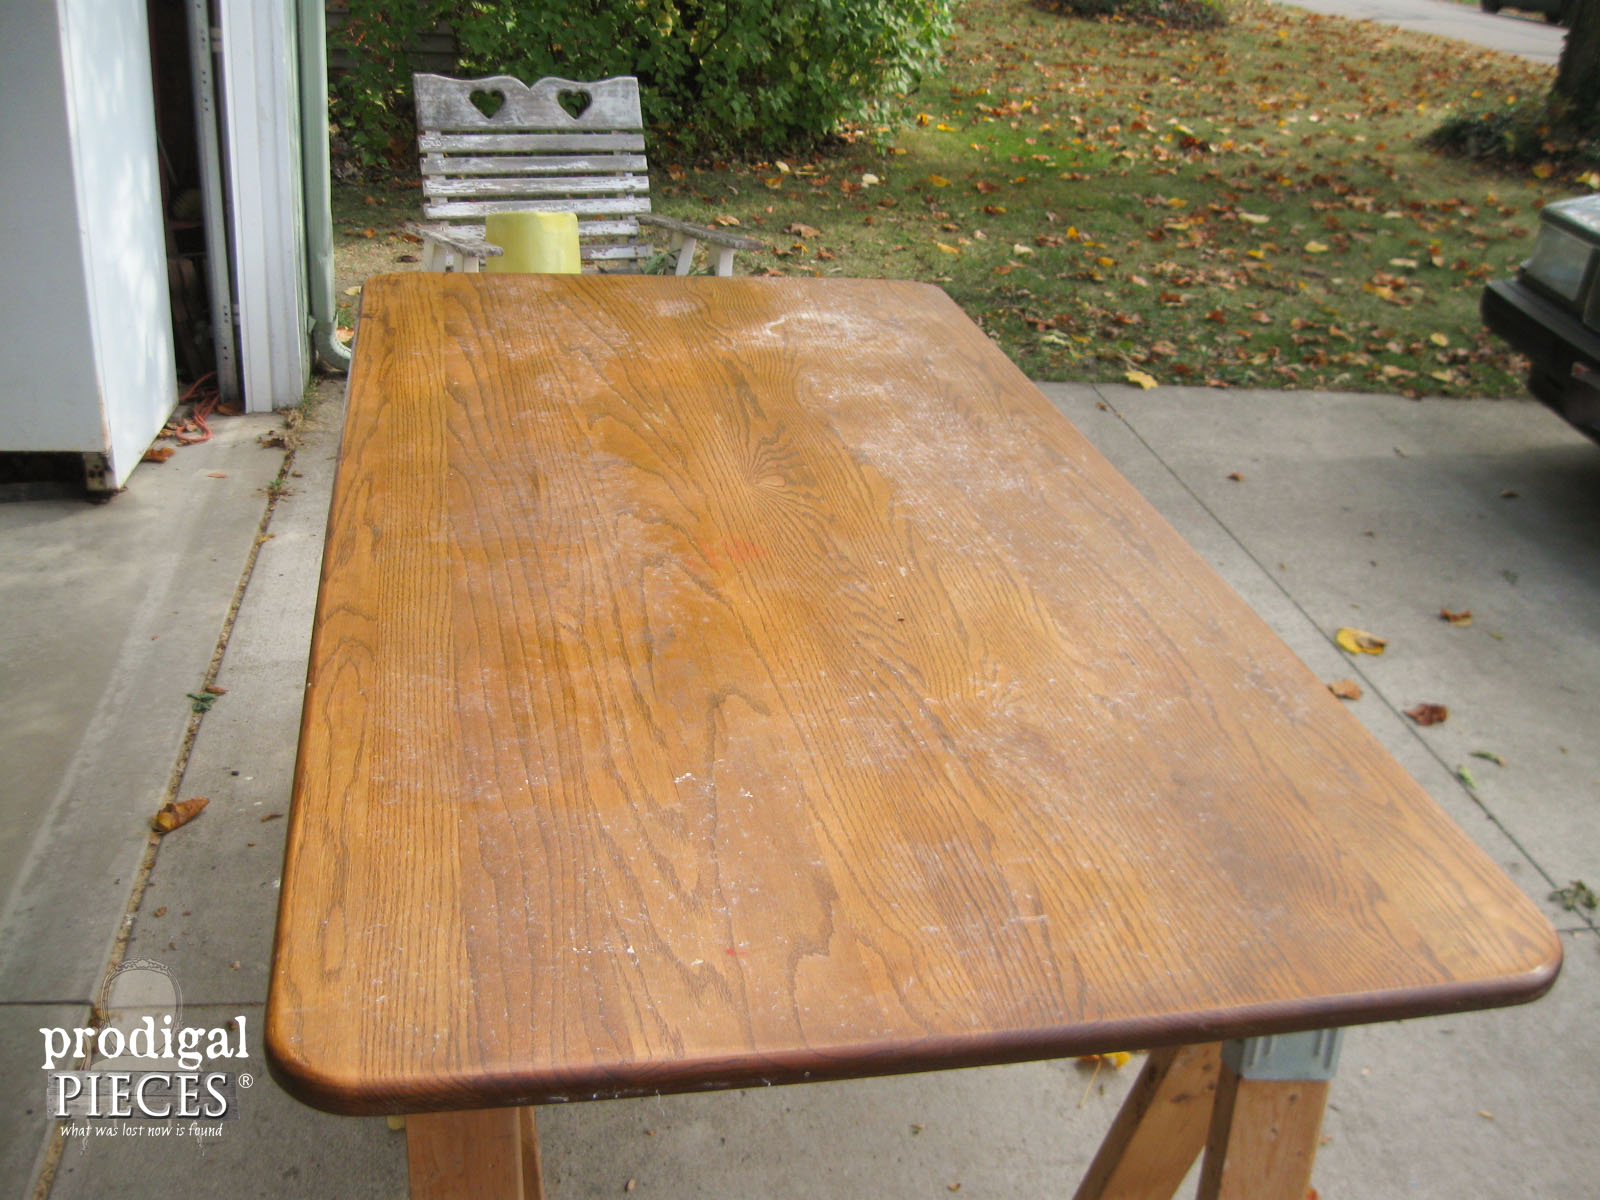 Farmhouse Table Top Being Whitewashed | Prodigal Pieces | www.prodigalpieces.com